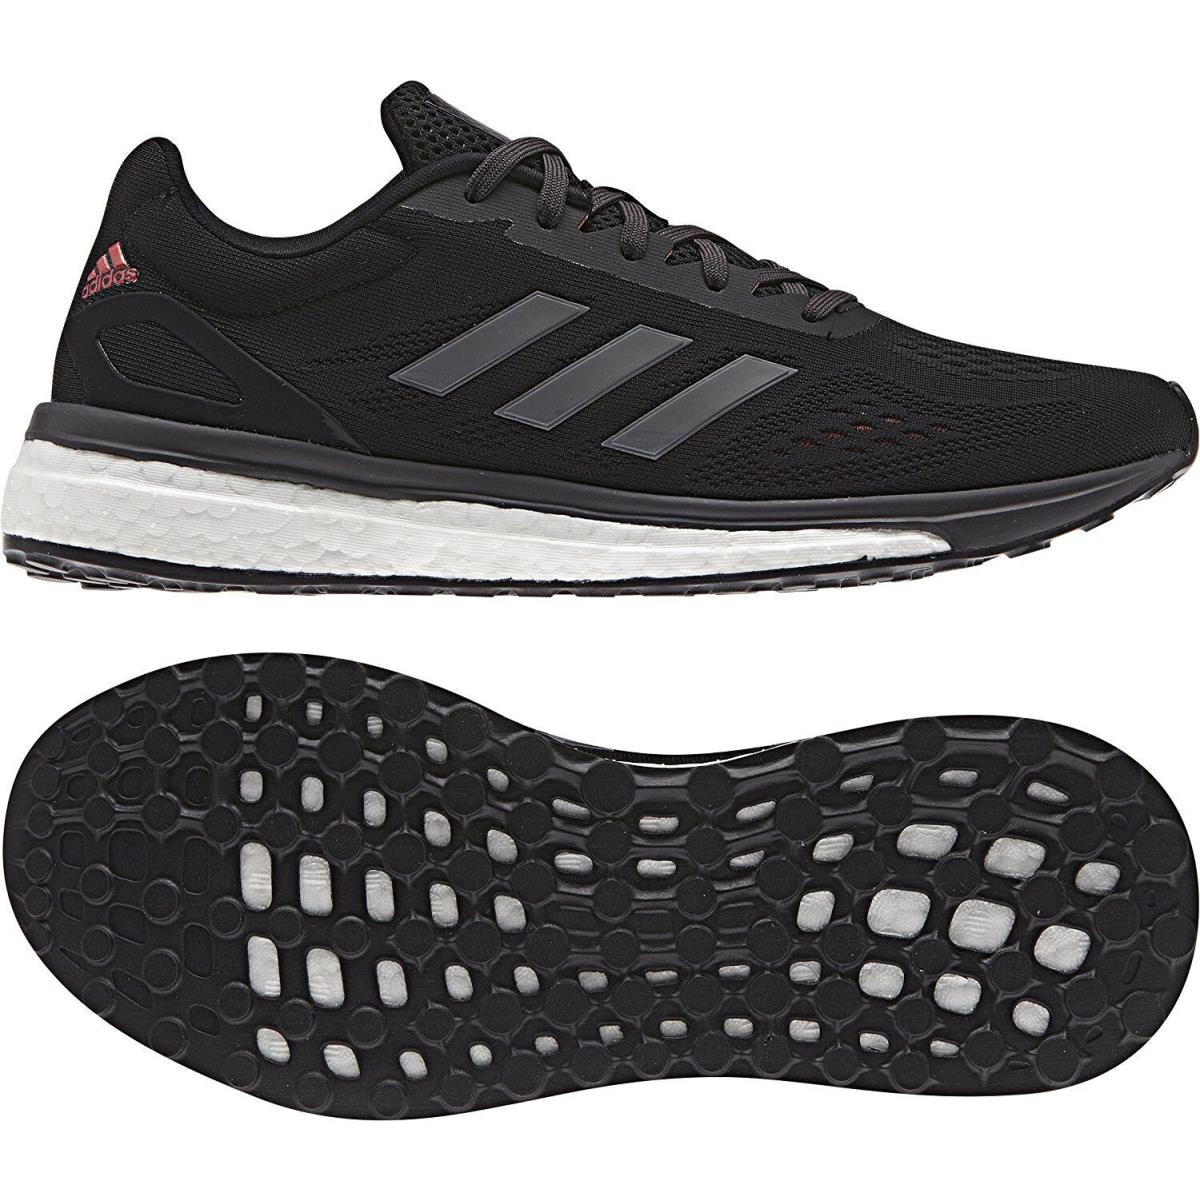 Women Adidas Sonic Drive Boost Running Shoes Black Sneakers - Black